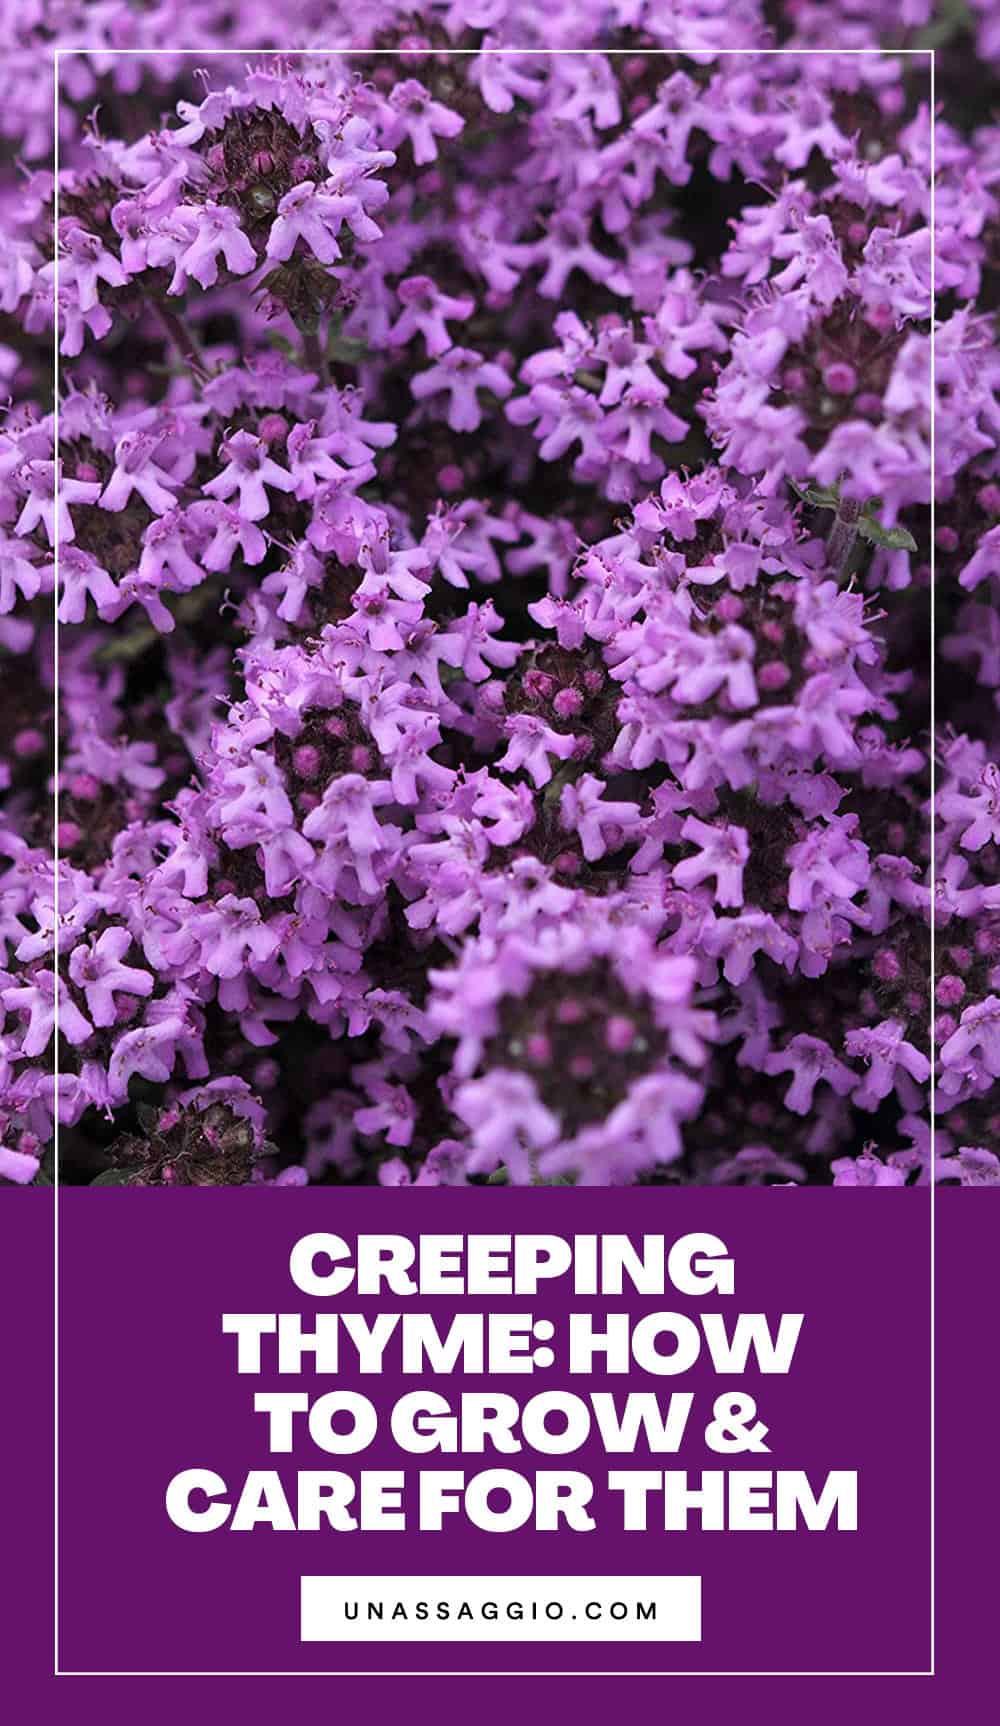 How do you maintain your creeping thyme plant?